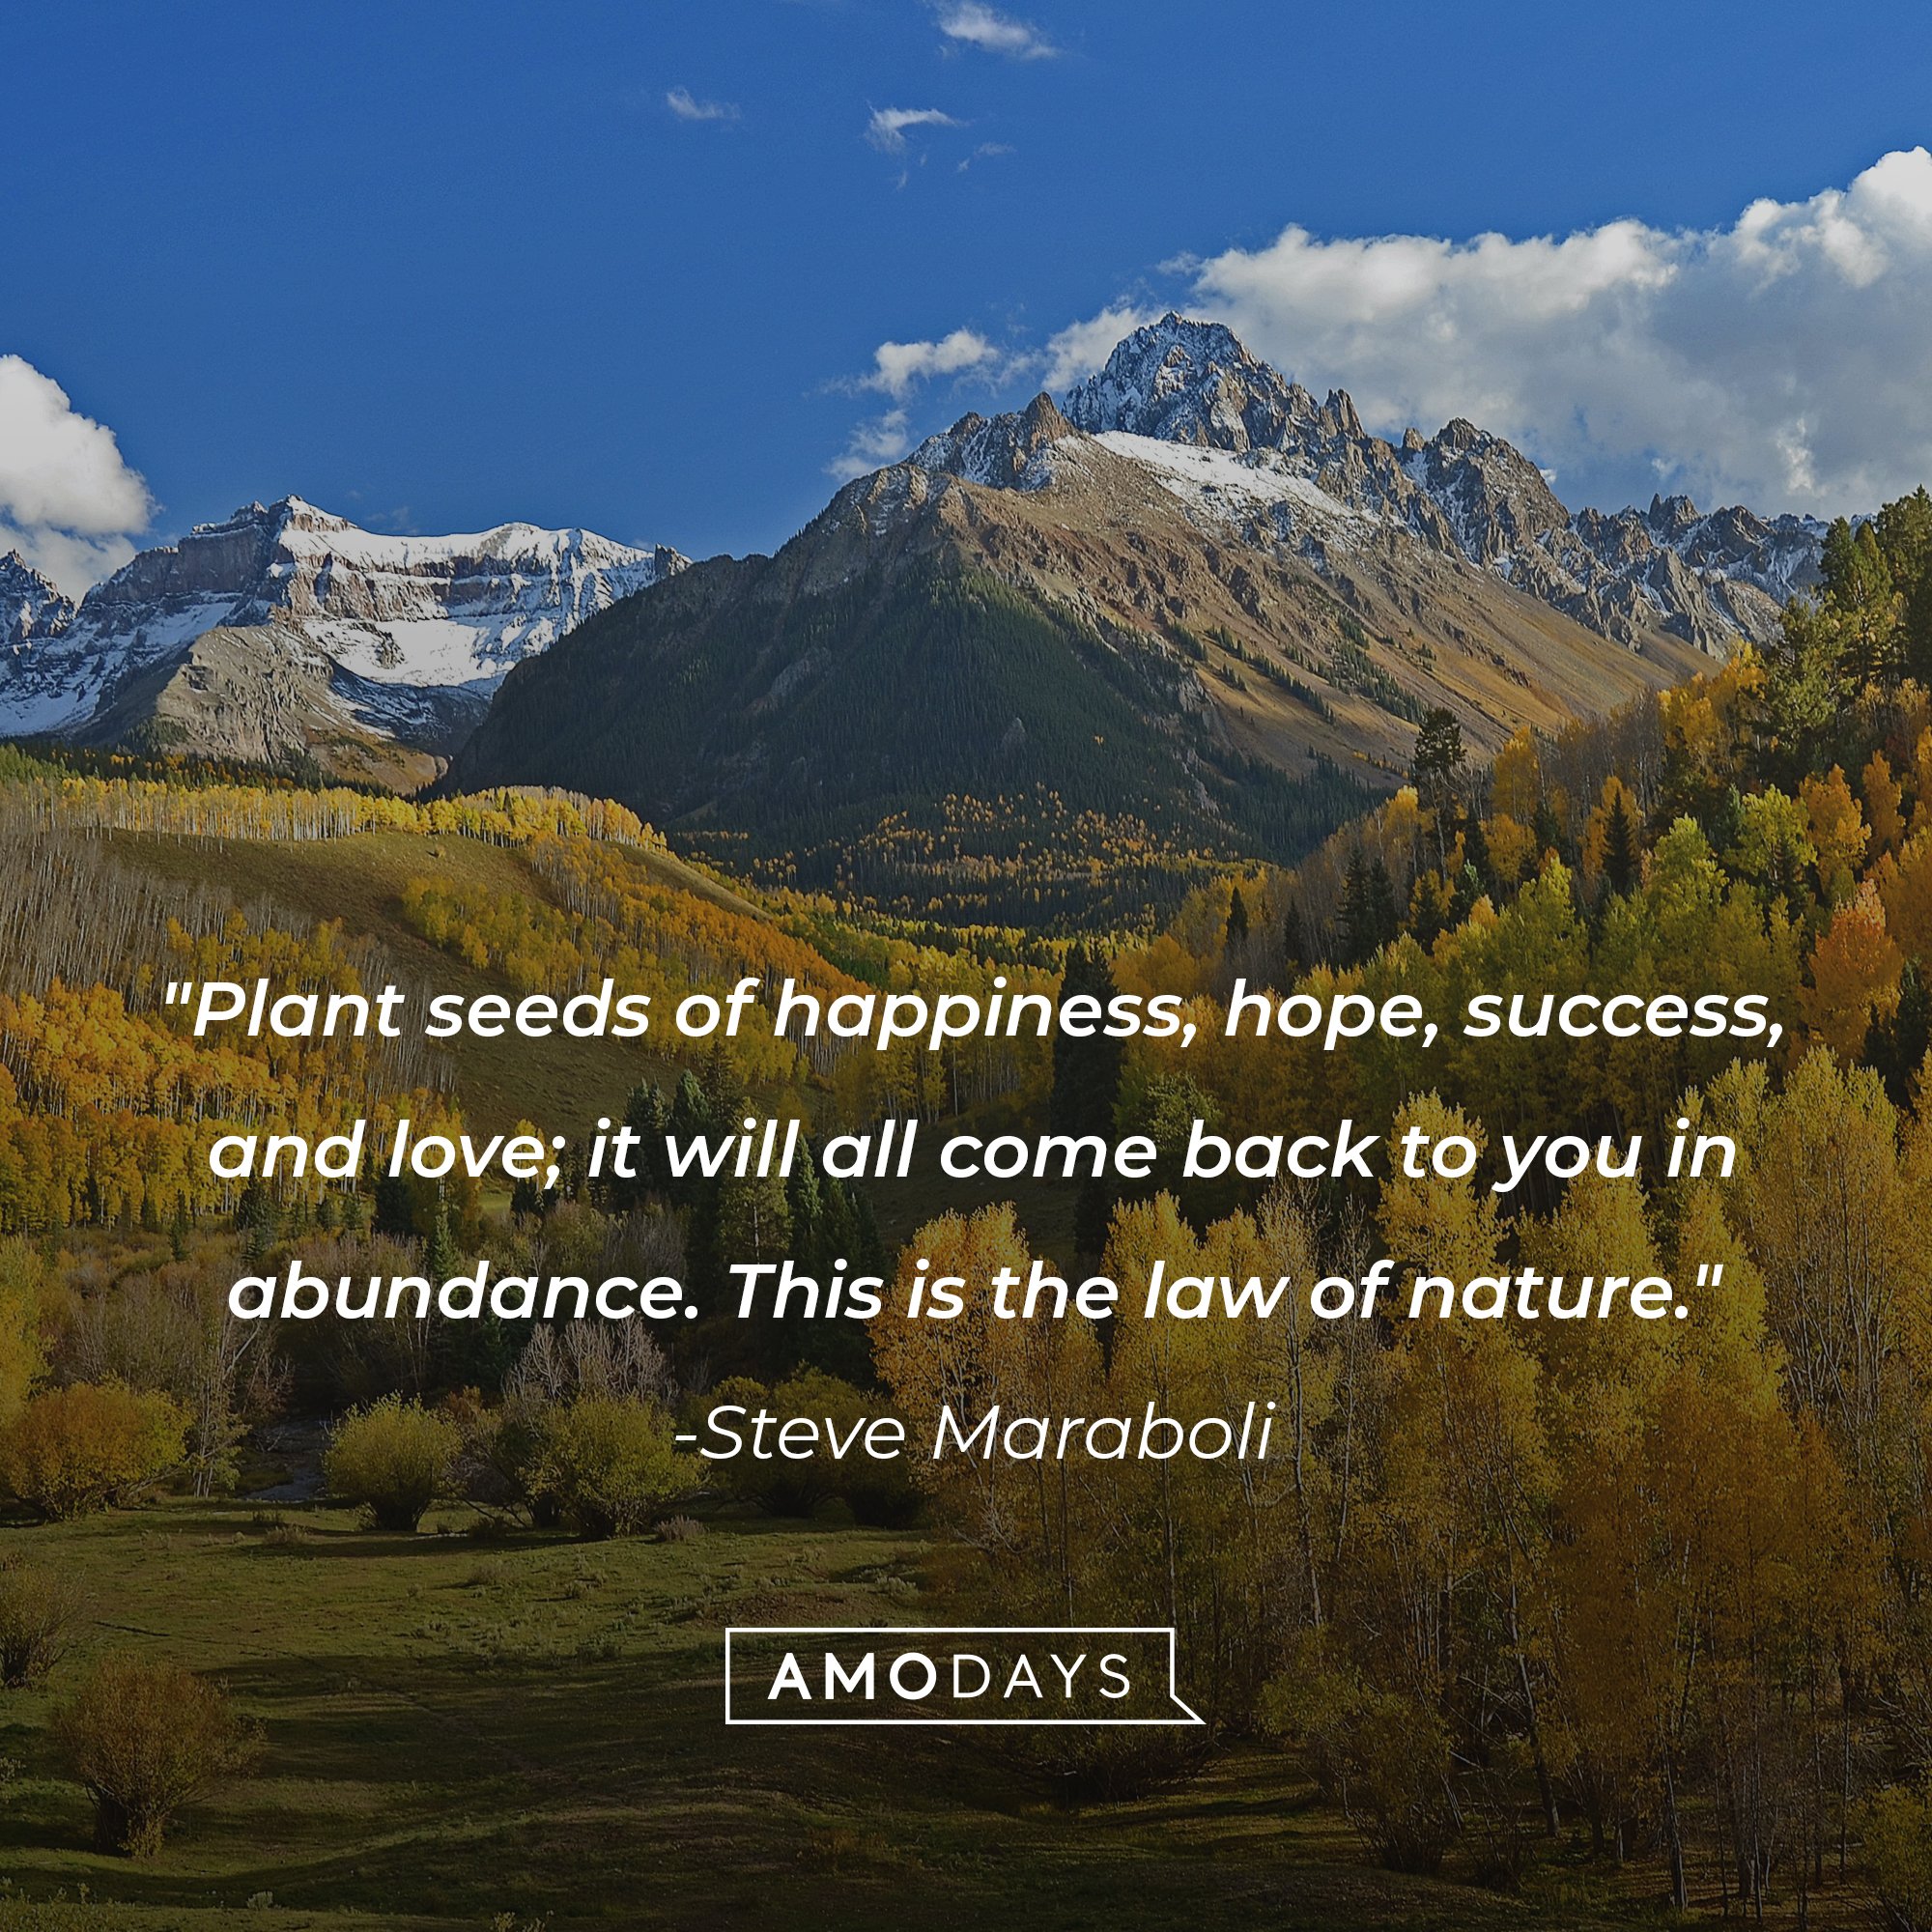 Steve Maraboli's quote: "Plant seeds of happiness, hope, success, and love; it will all come back to you in abundance. This is the law of nature." | Image: AmoDays